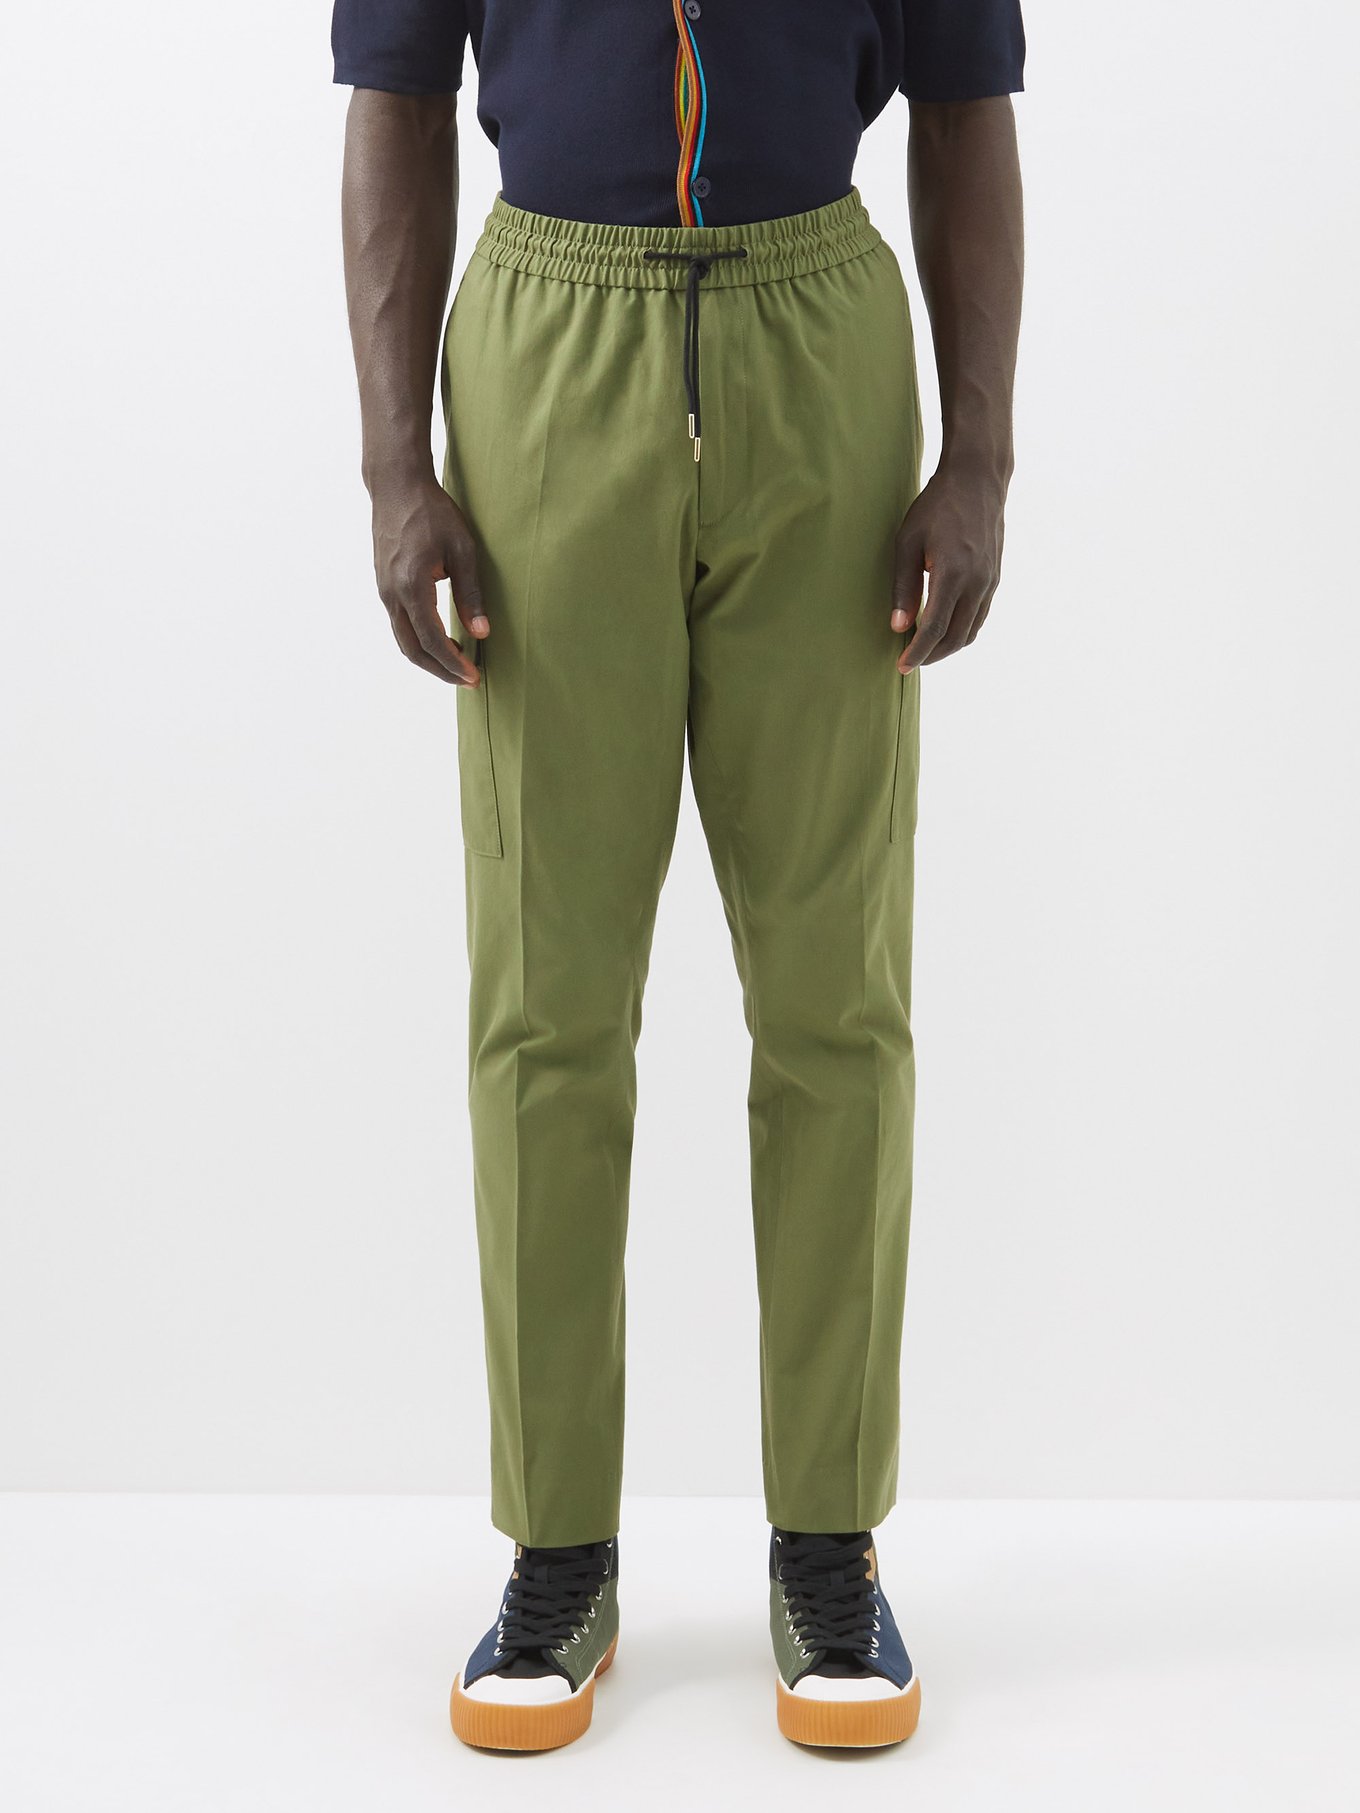 stitch color relax pants  /  aclent